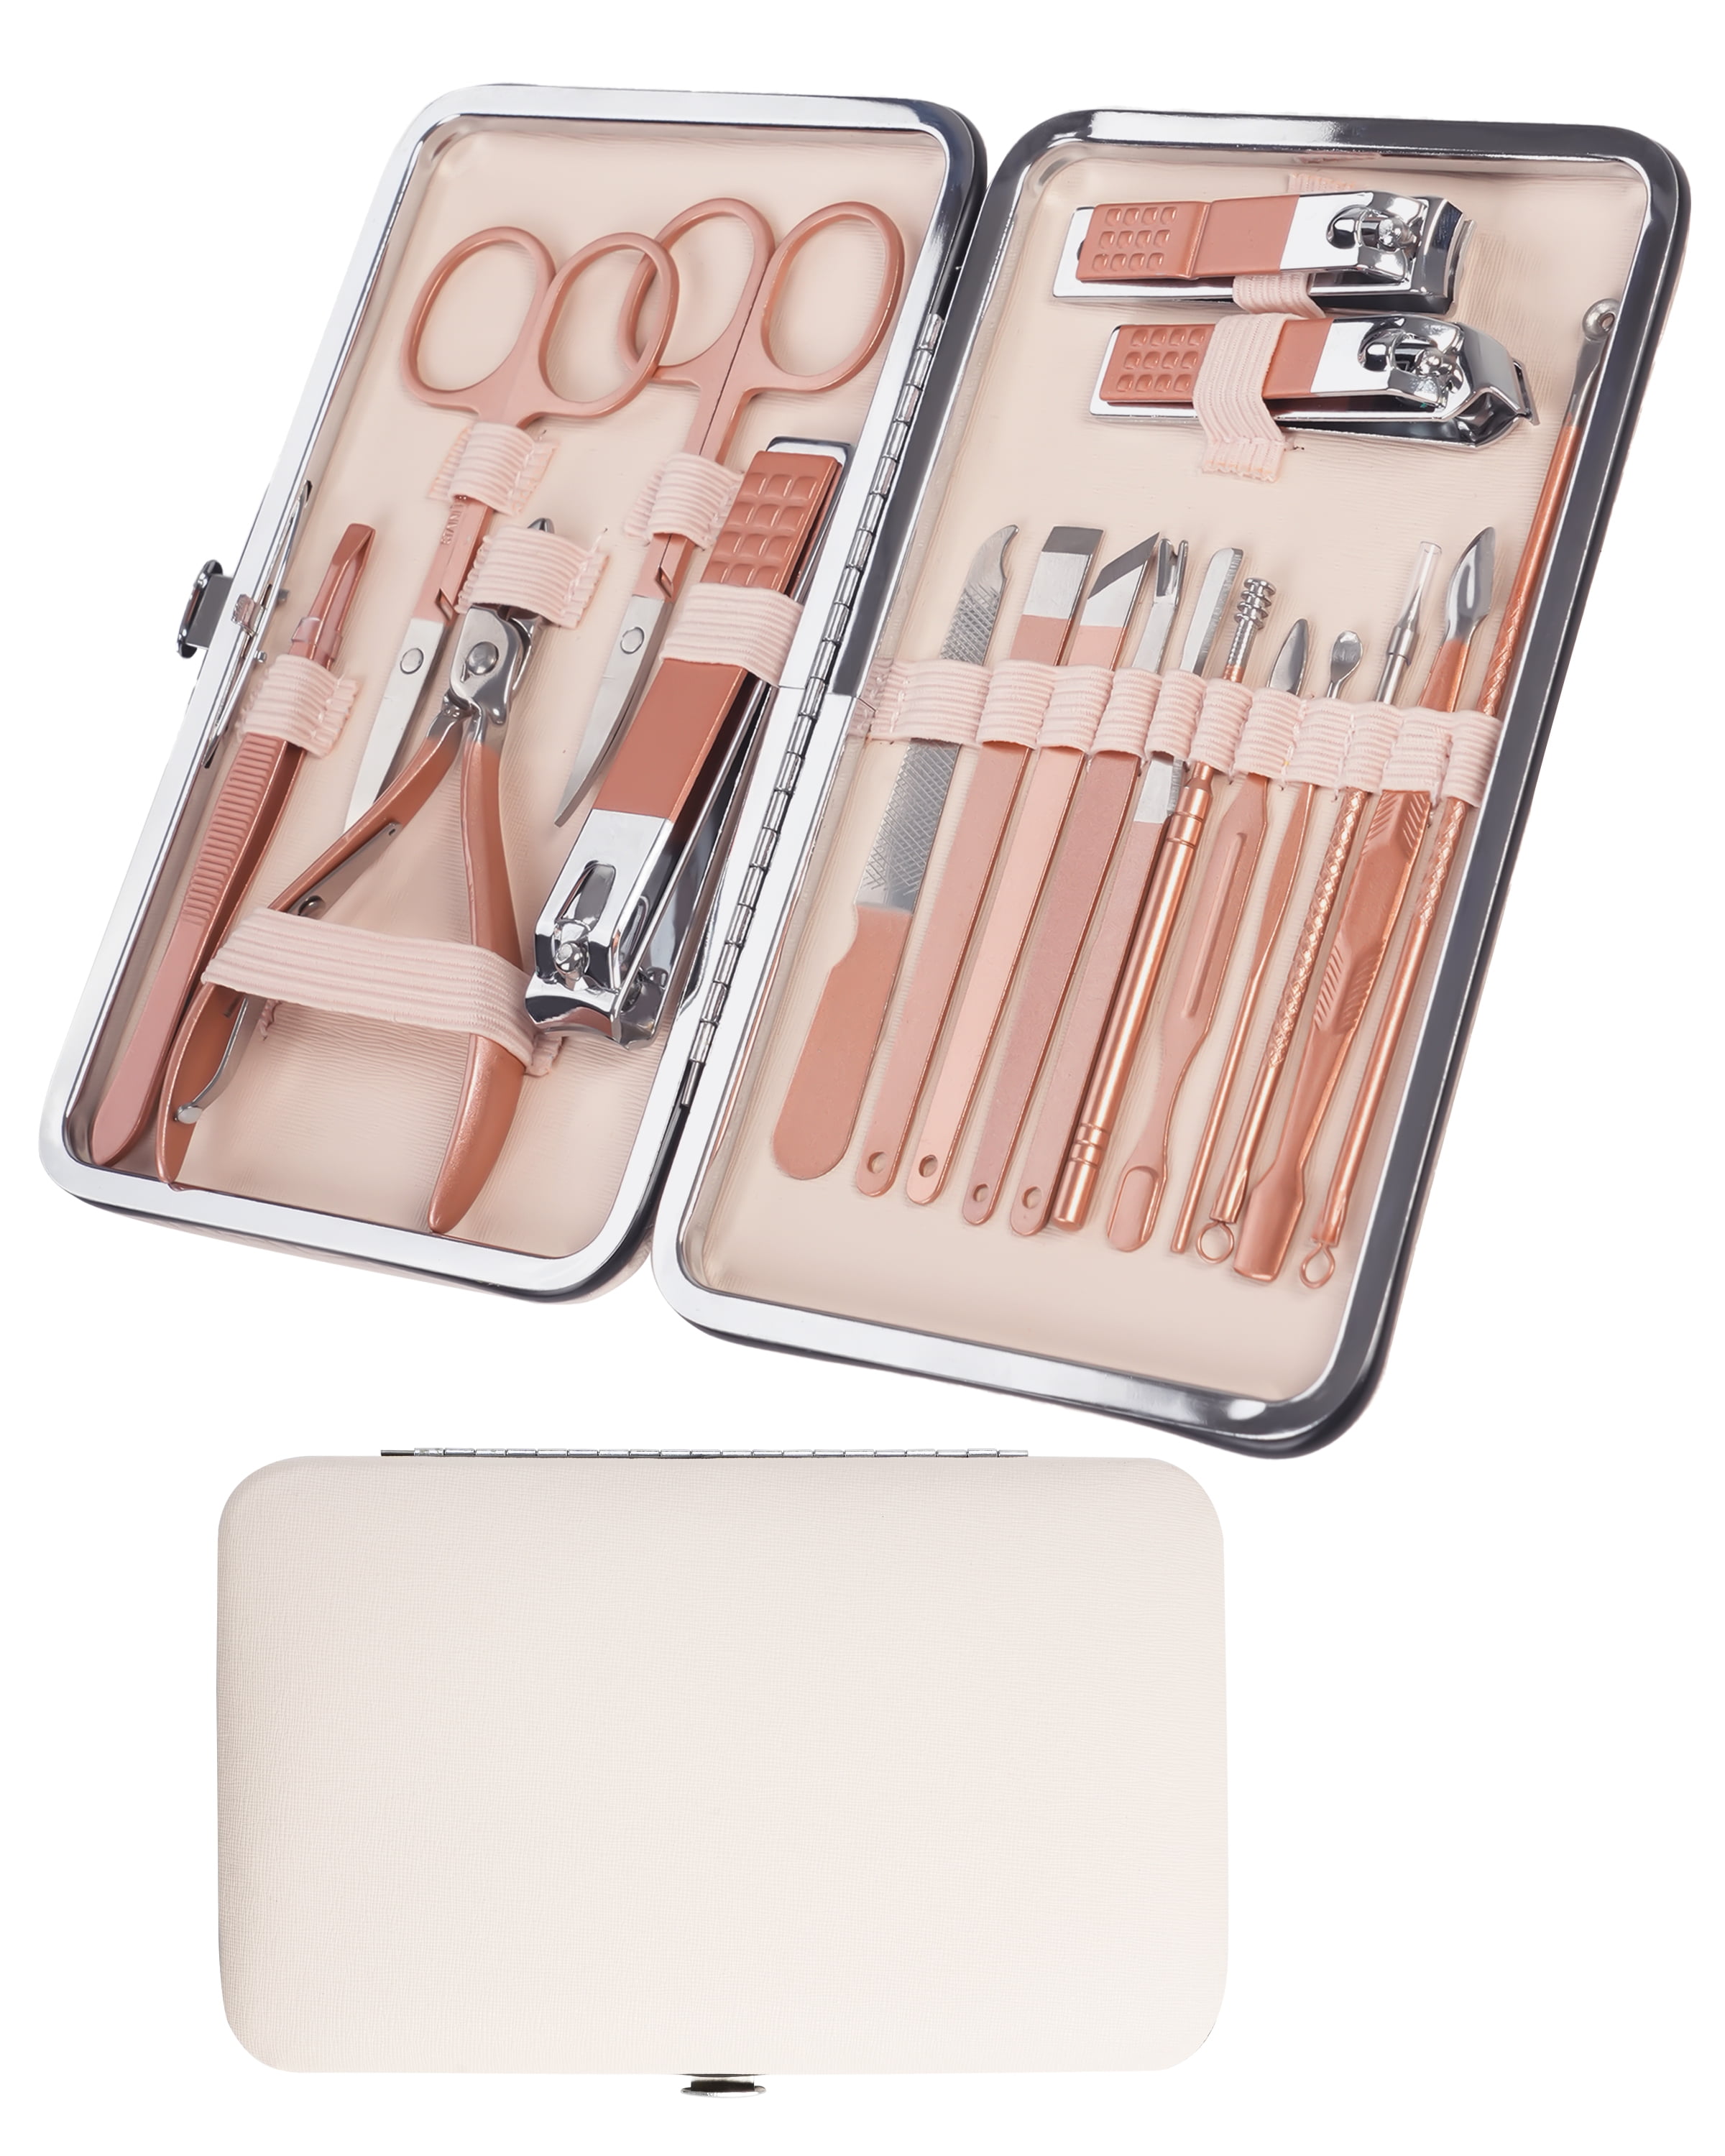 18-piece Manicure/Pedicure Device & Nail Set Included, MP44 — Beurer North  America